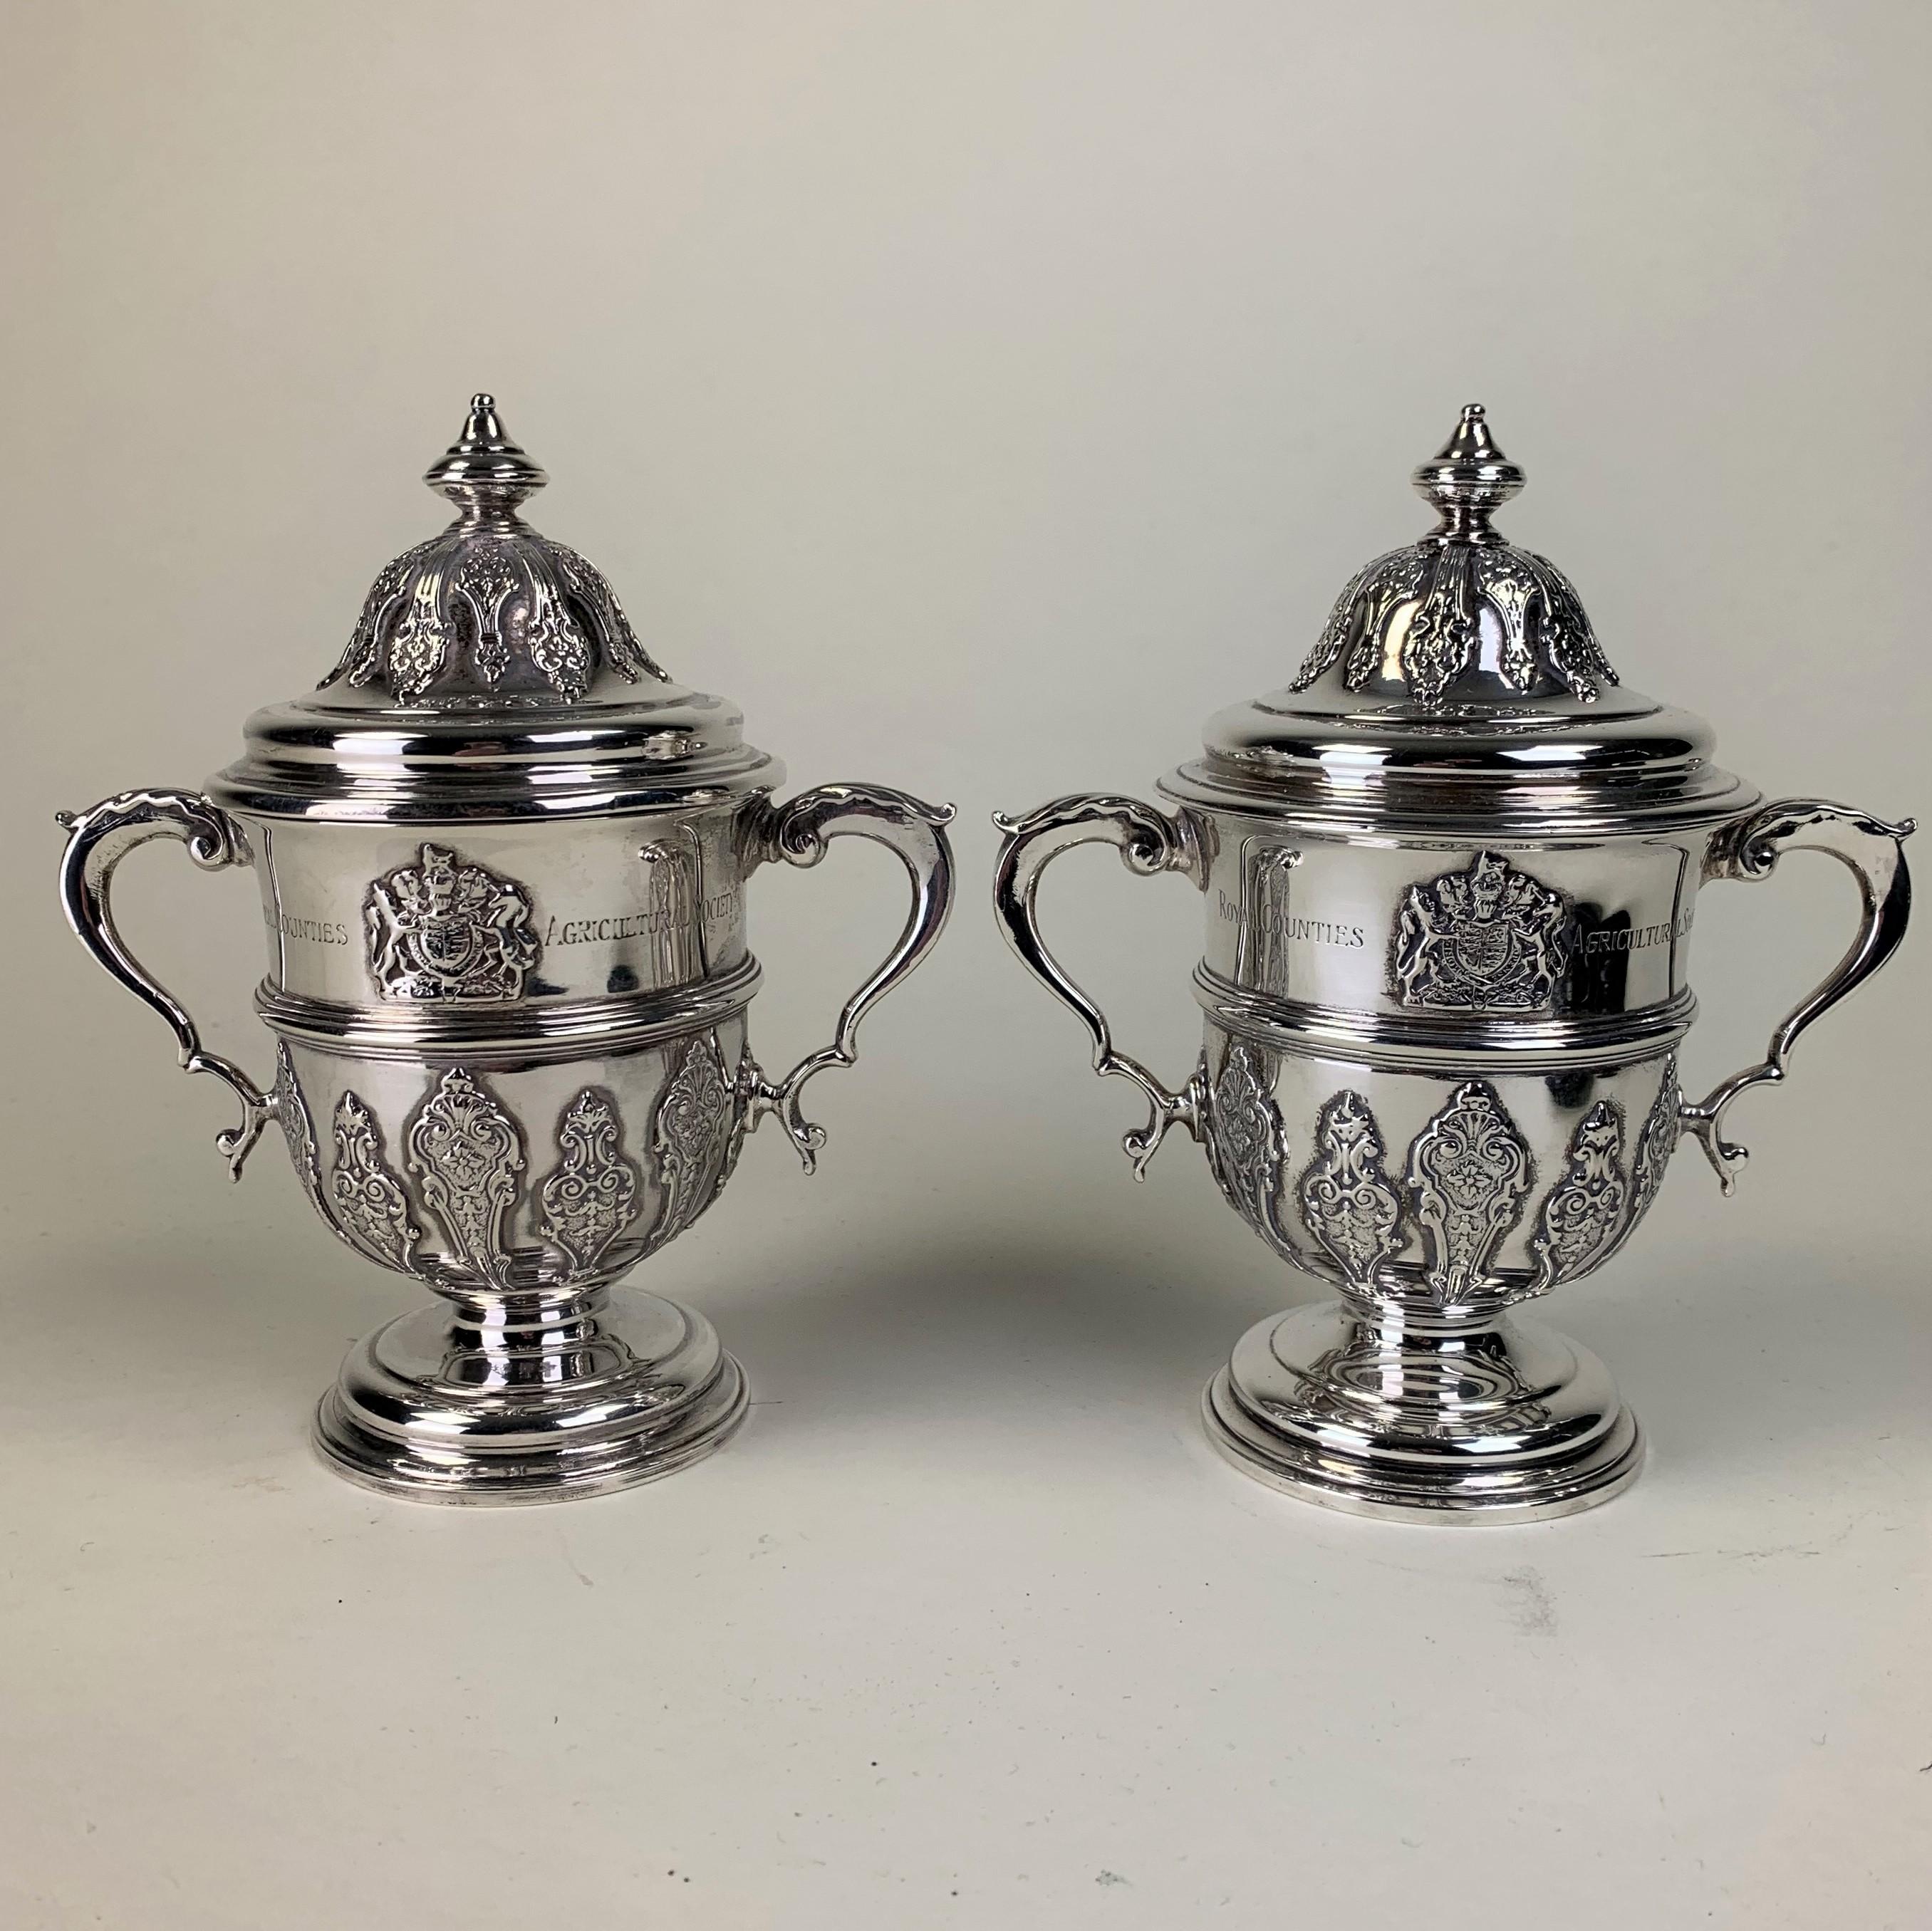 A very fine quality pair of silver Trophy Cups with lids and scrolled handles presented by the Royal Counties Agricultural Society. Each engraved 